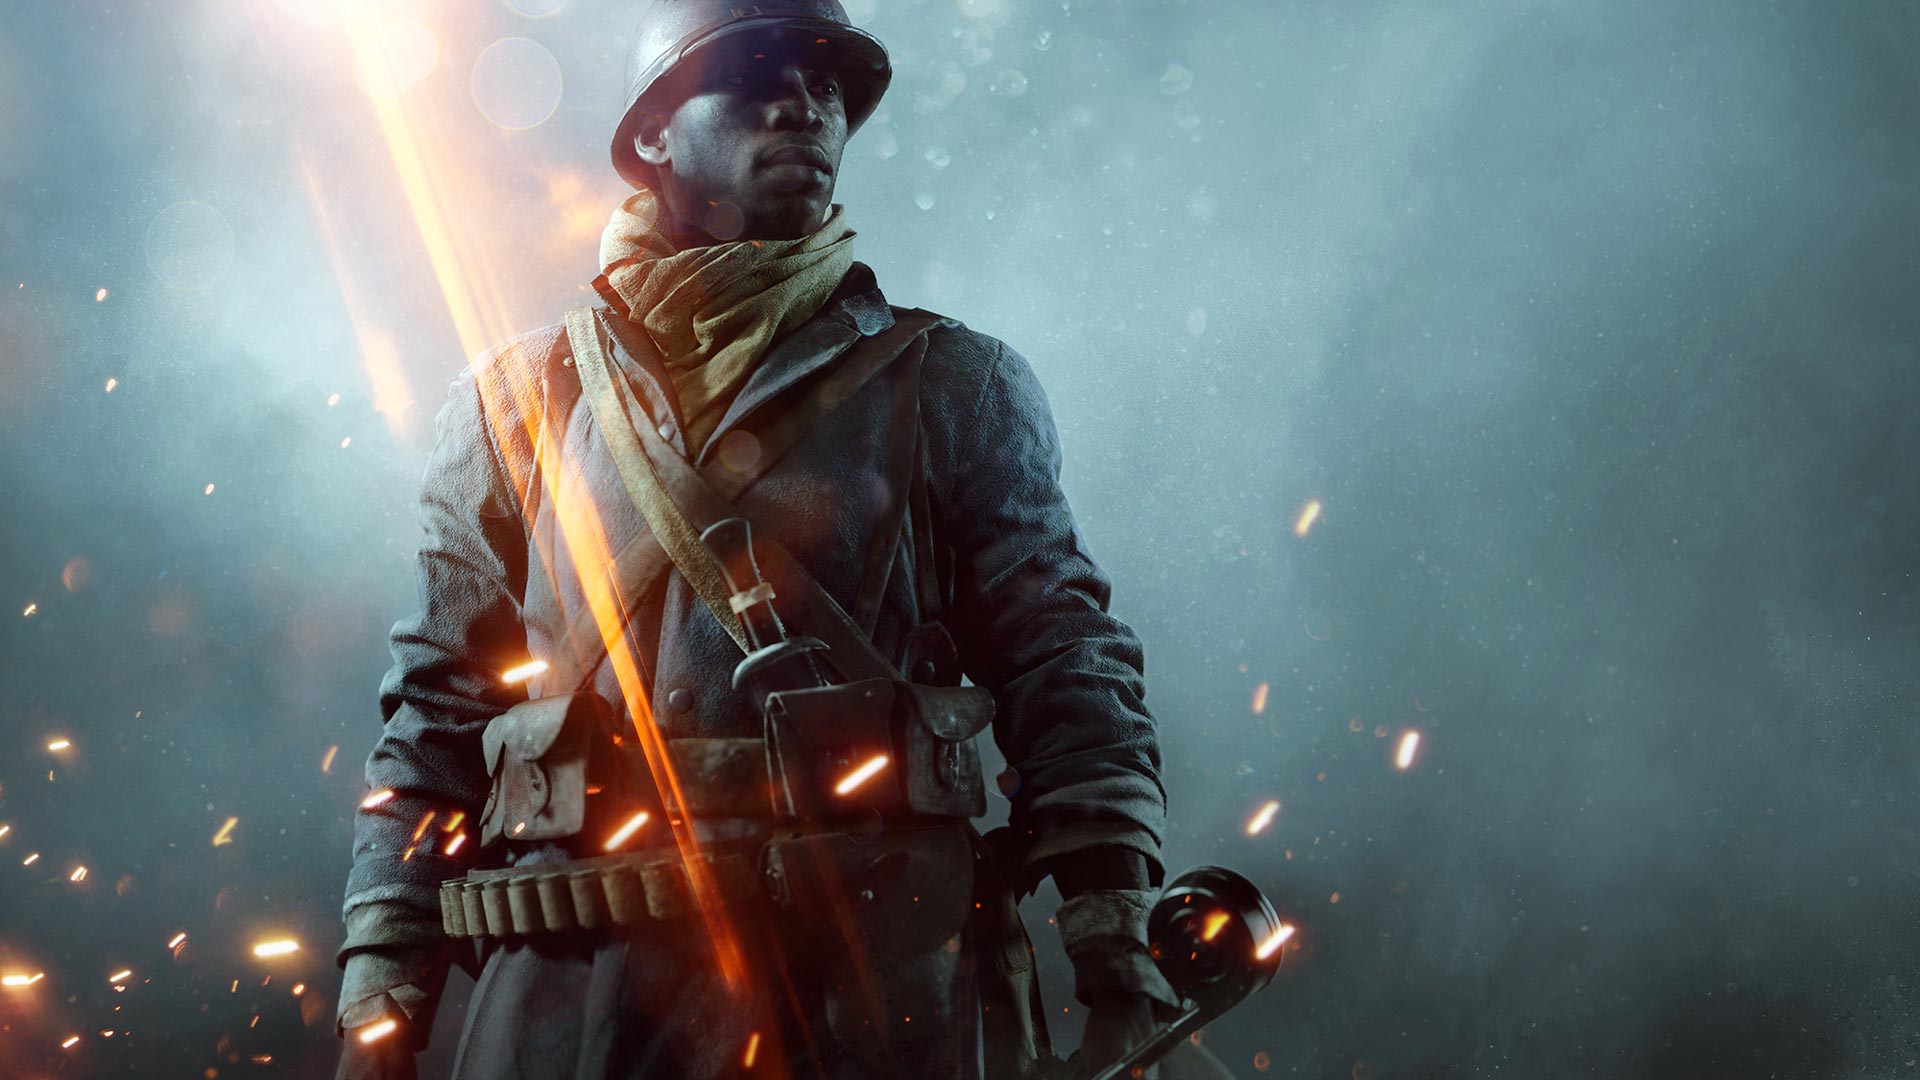 New Battlefield game confirmed for release in 2018